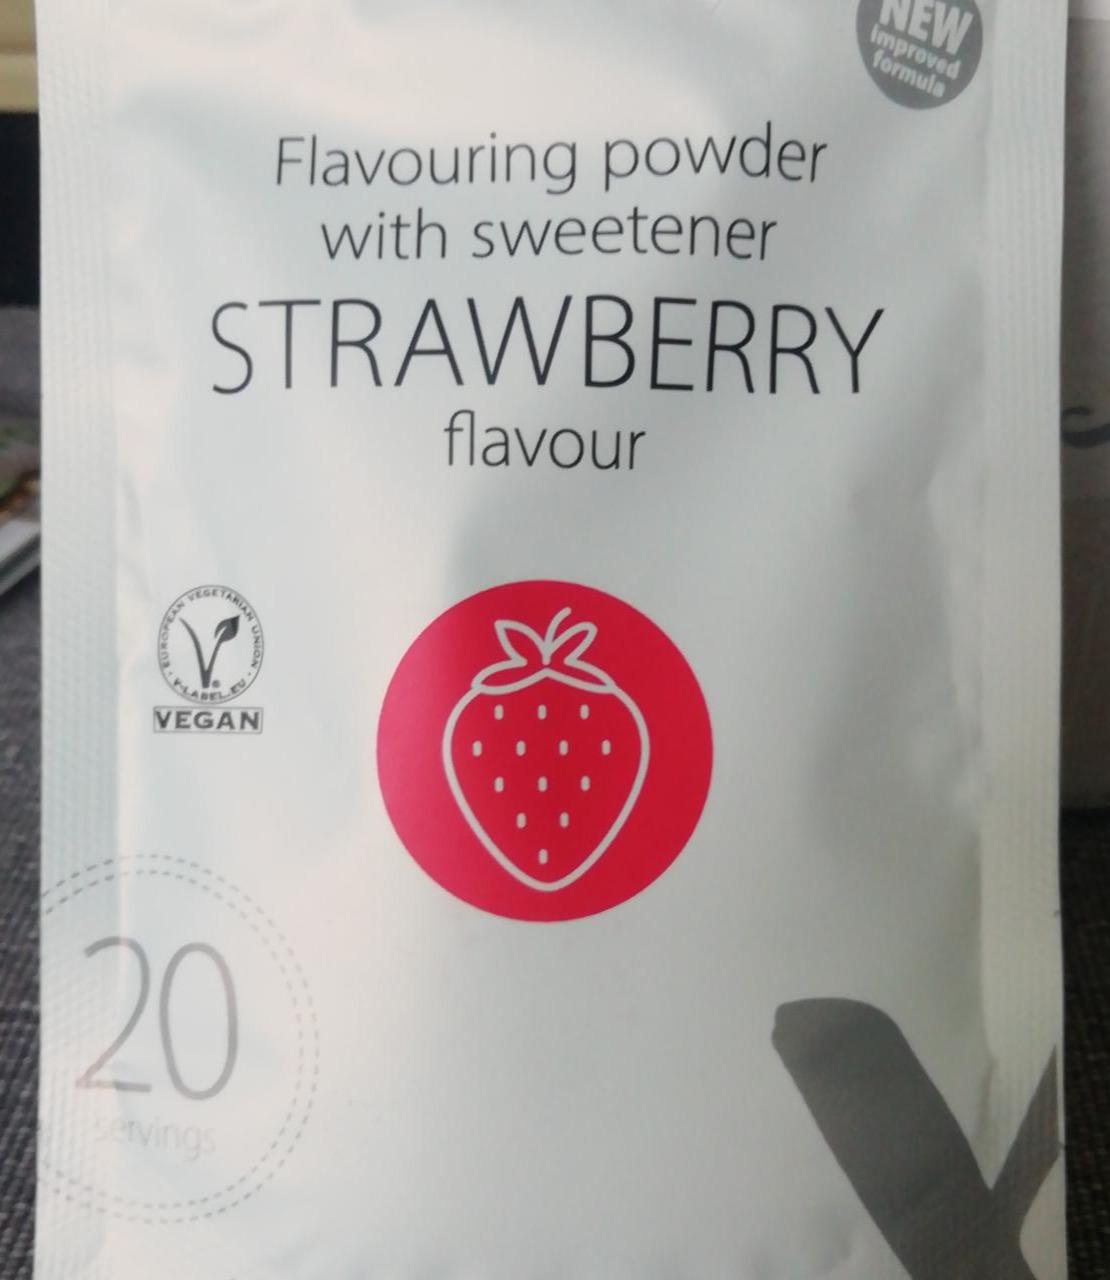 Fotografie - Flavouring powder with sweetener strawberry flavour KetoMix